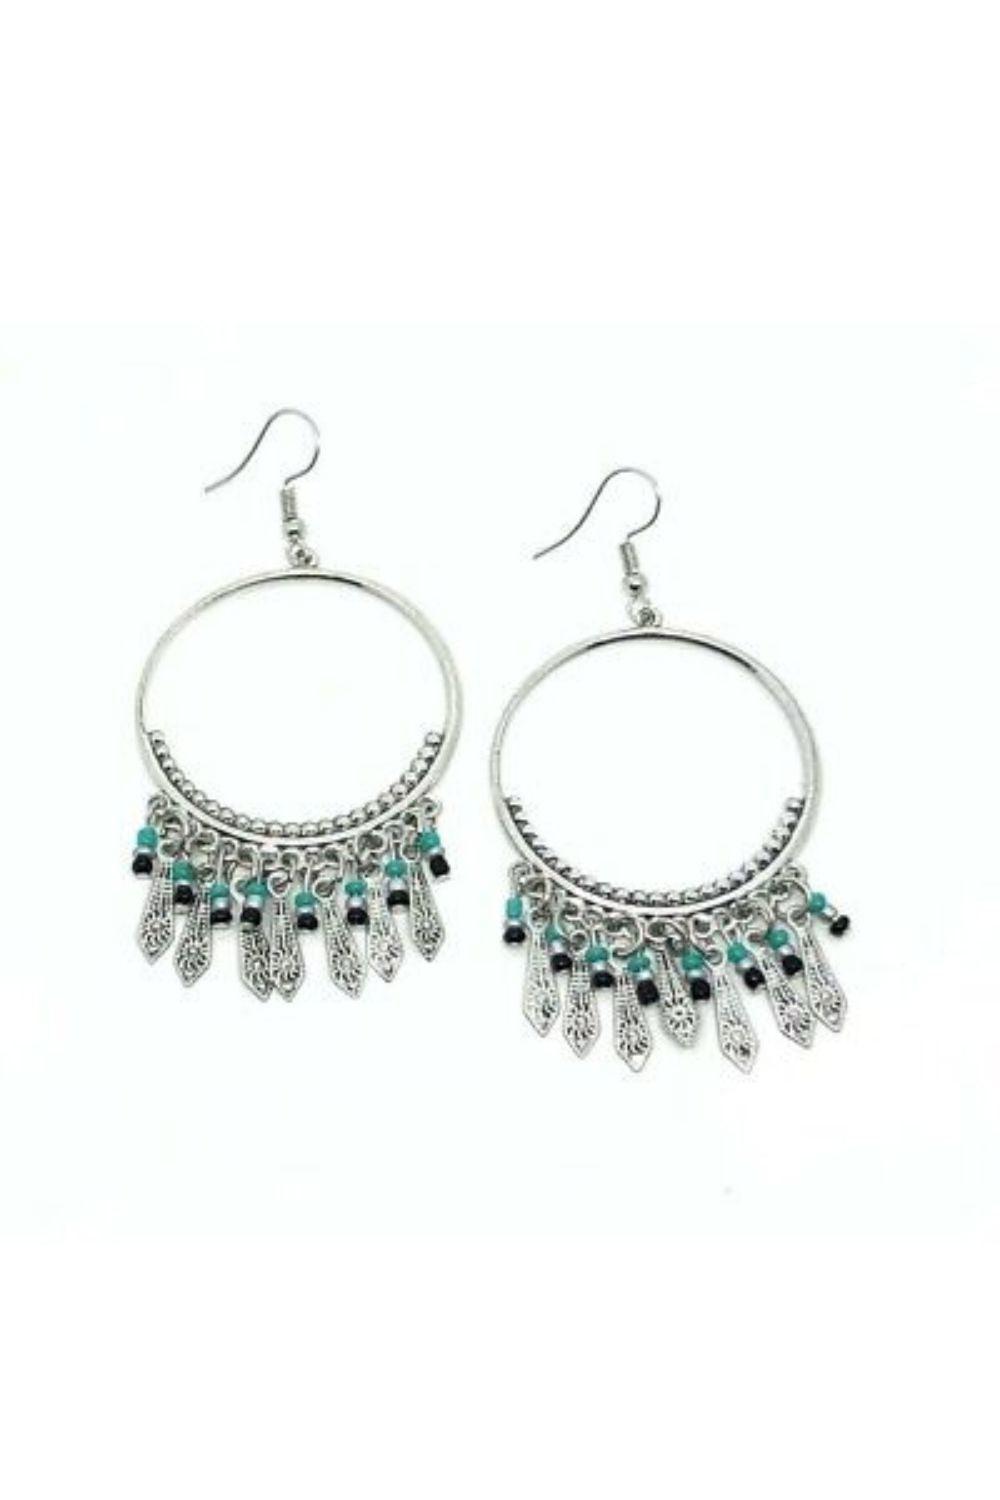 Floral Serenity Silver and Blue Earrings - Paparazzi Accessories- on model - CarasShop.com - $5 Jewelry by Cara Jewels